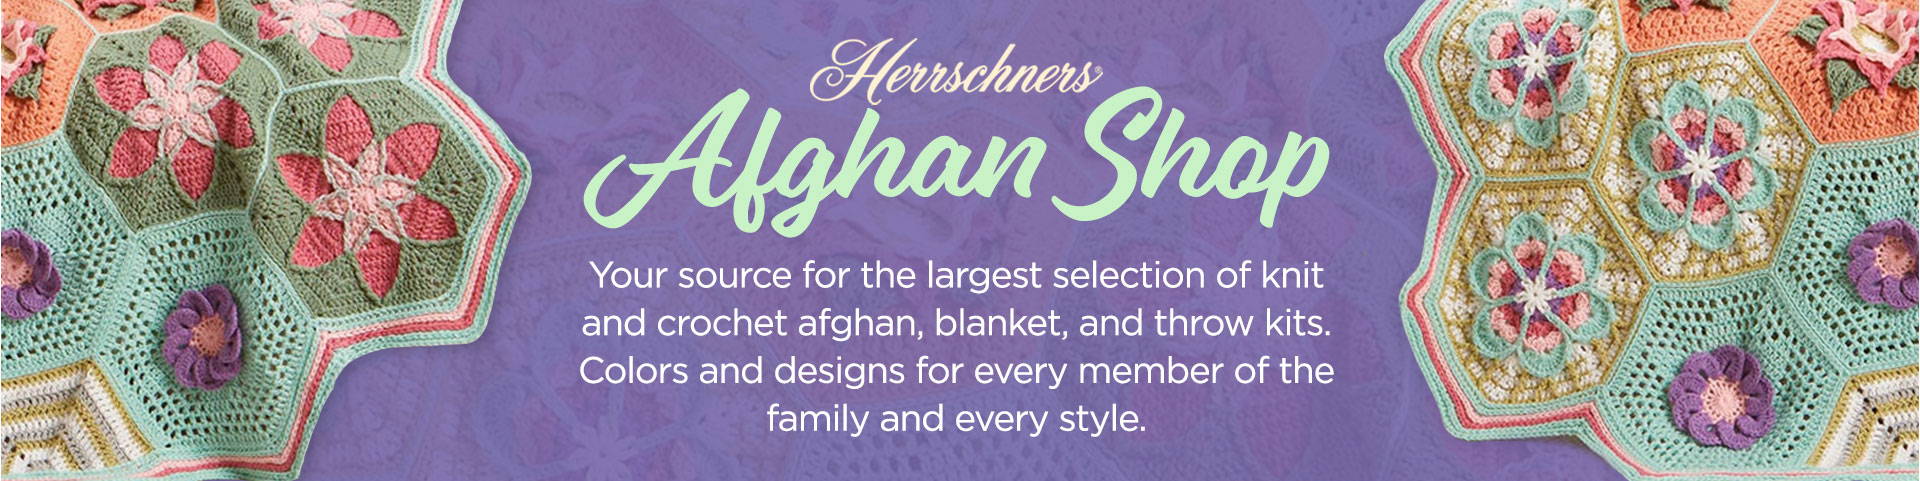 Afghan Shop Your source for the biggest selection of knit & crochet afghan, blanket, and throw kits. Colors and designs for every member of the family and every style. 